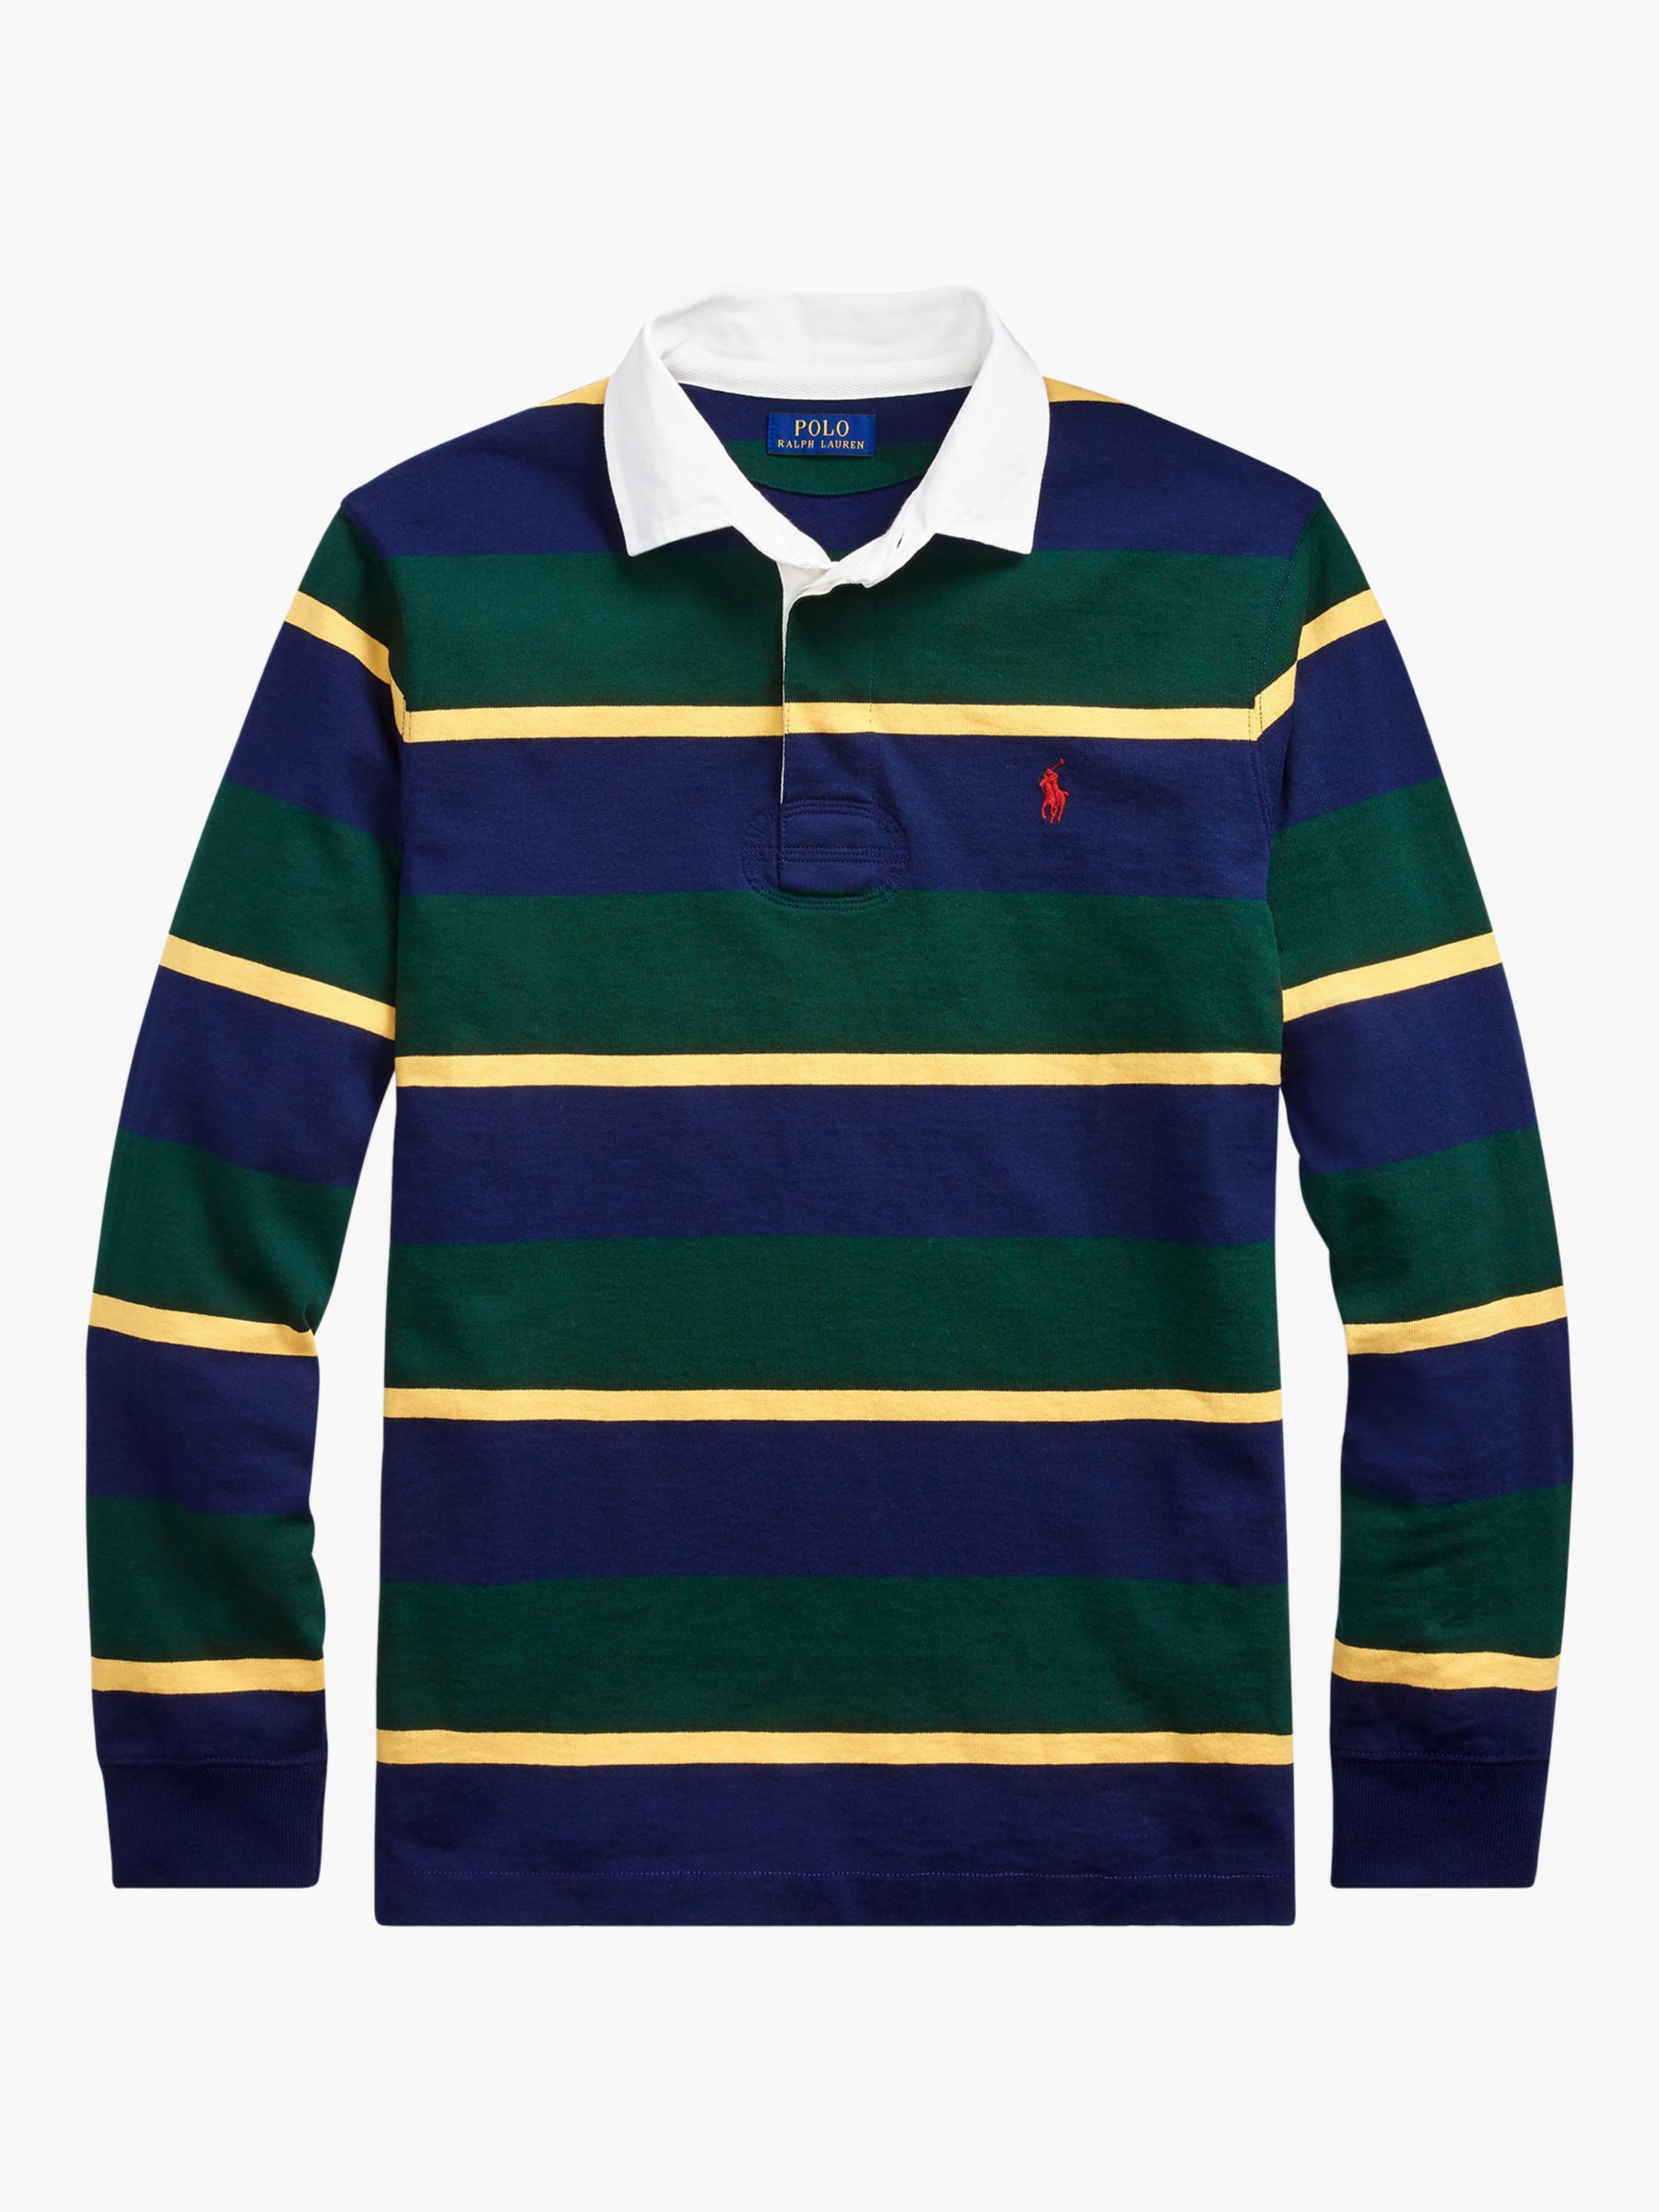 polo rugby shirts